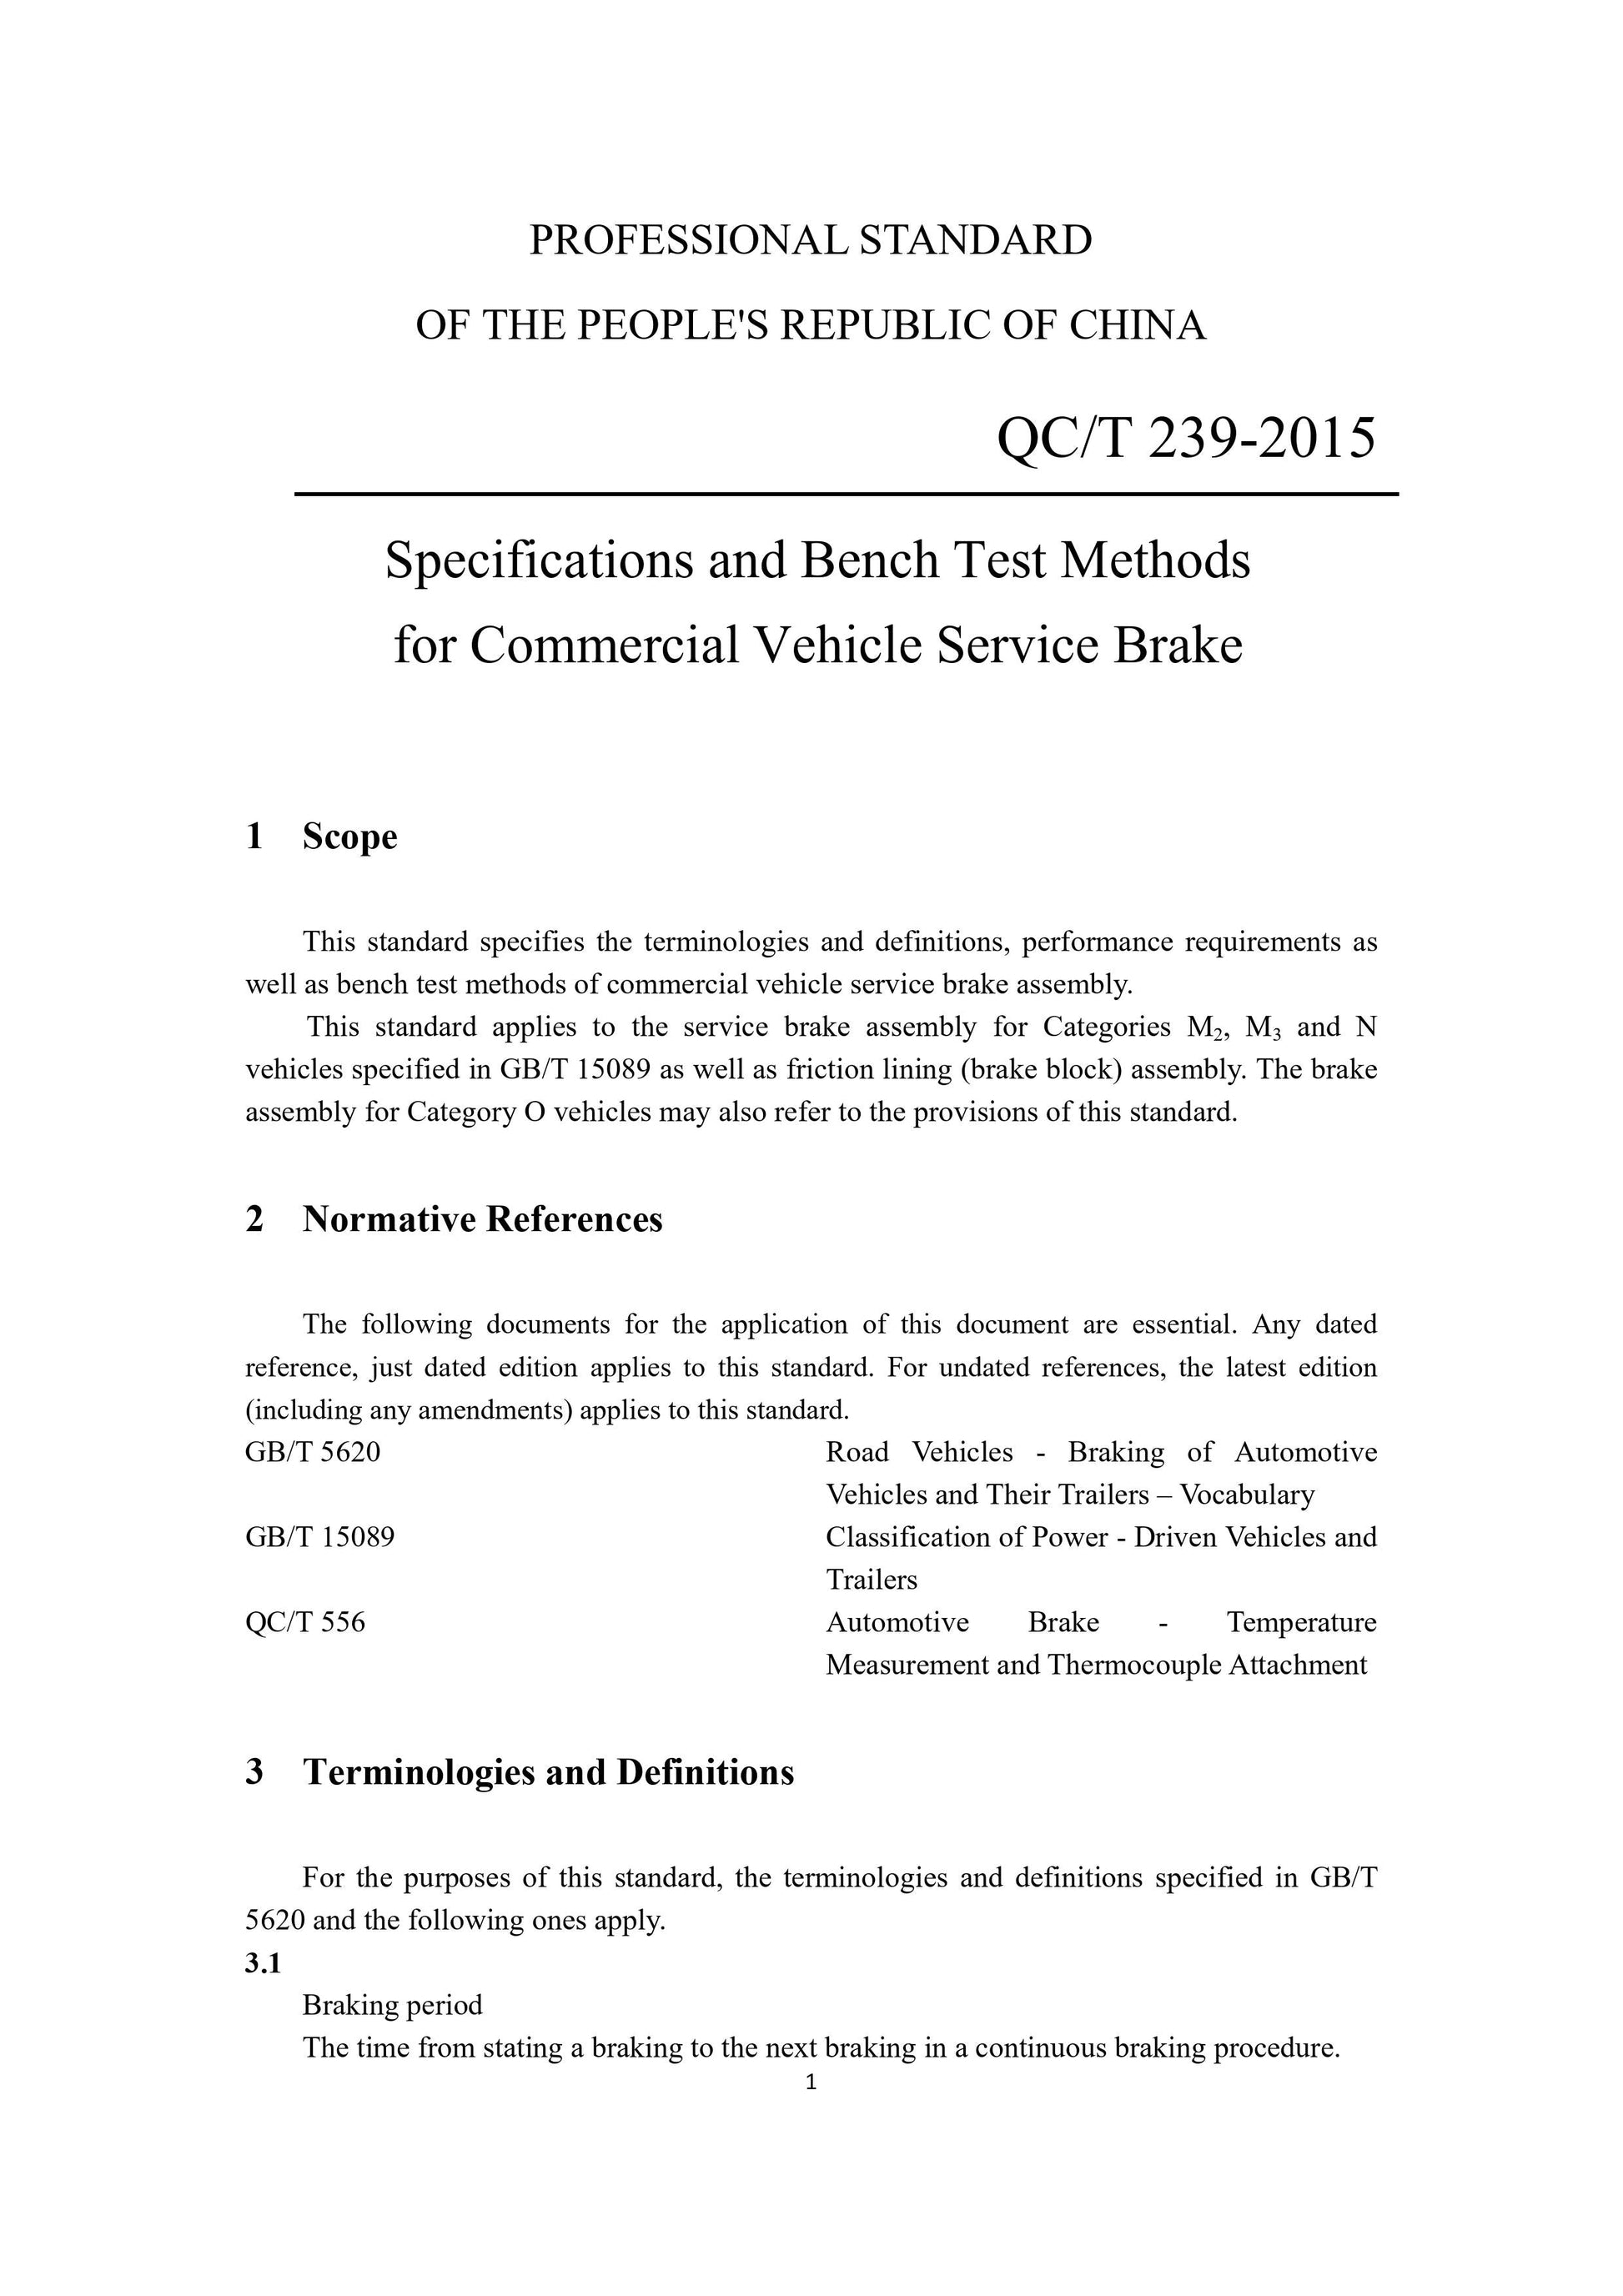 QC/T 239-2015 Page 8